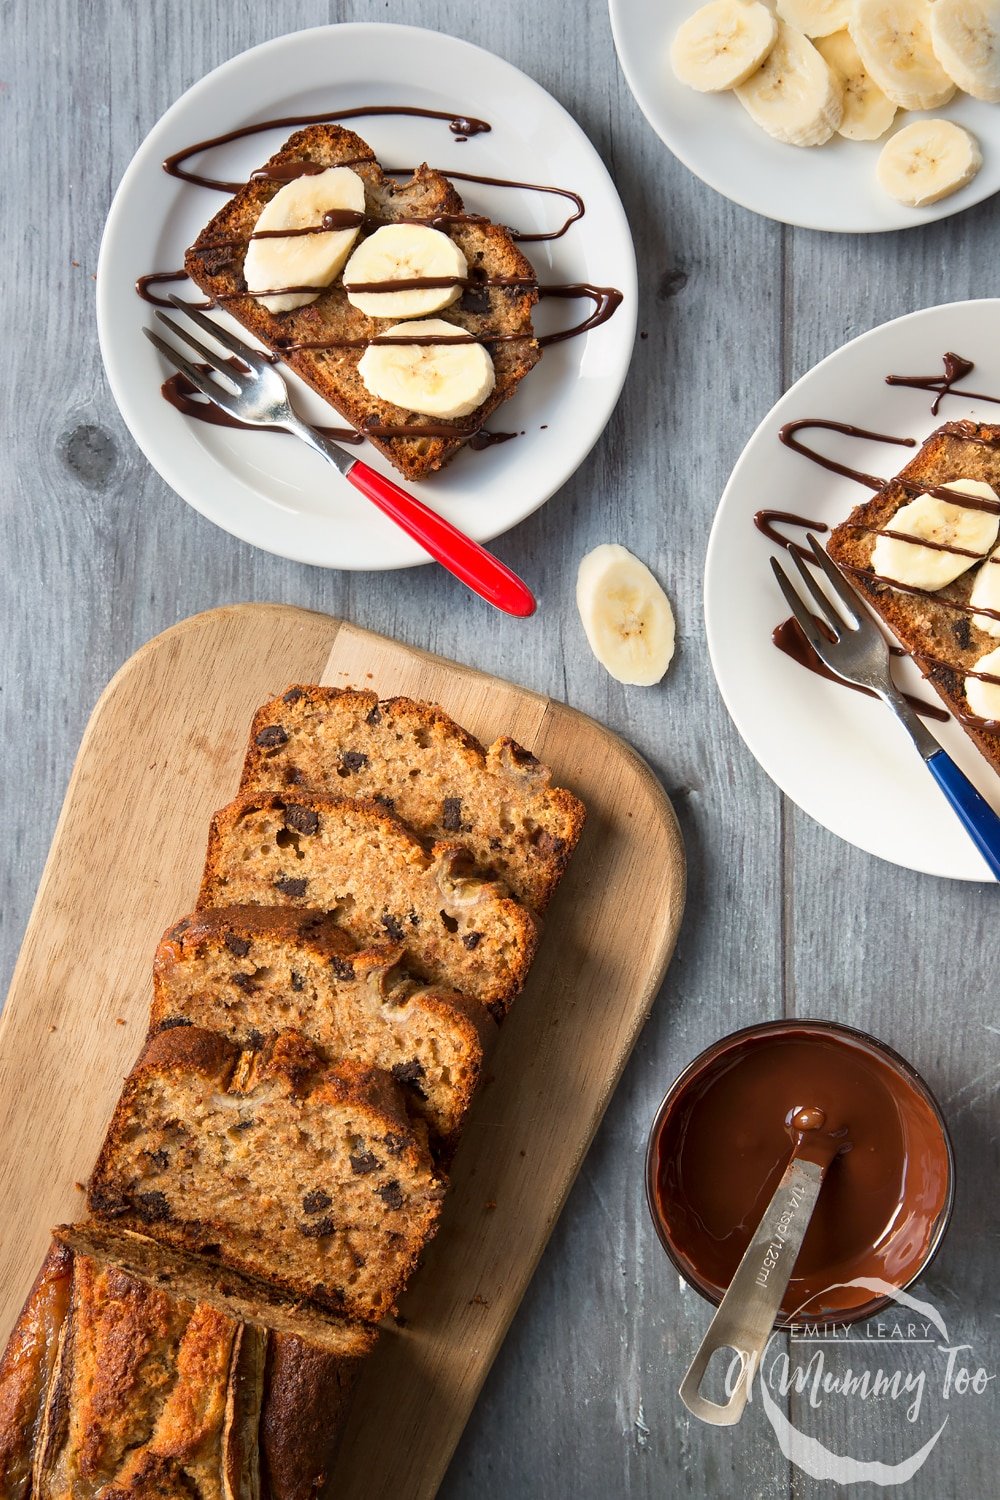 Overhead shot of dark chocolate banana loaf slices on two white plates with the remaining loaf on a wooden board.